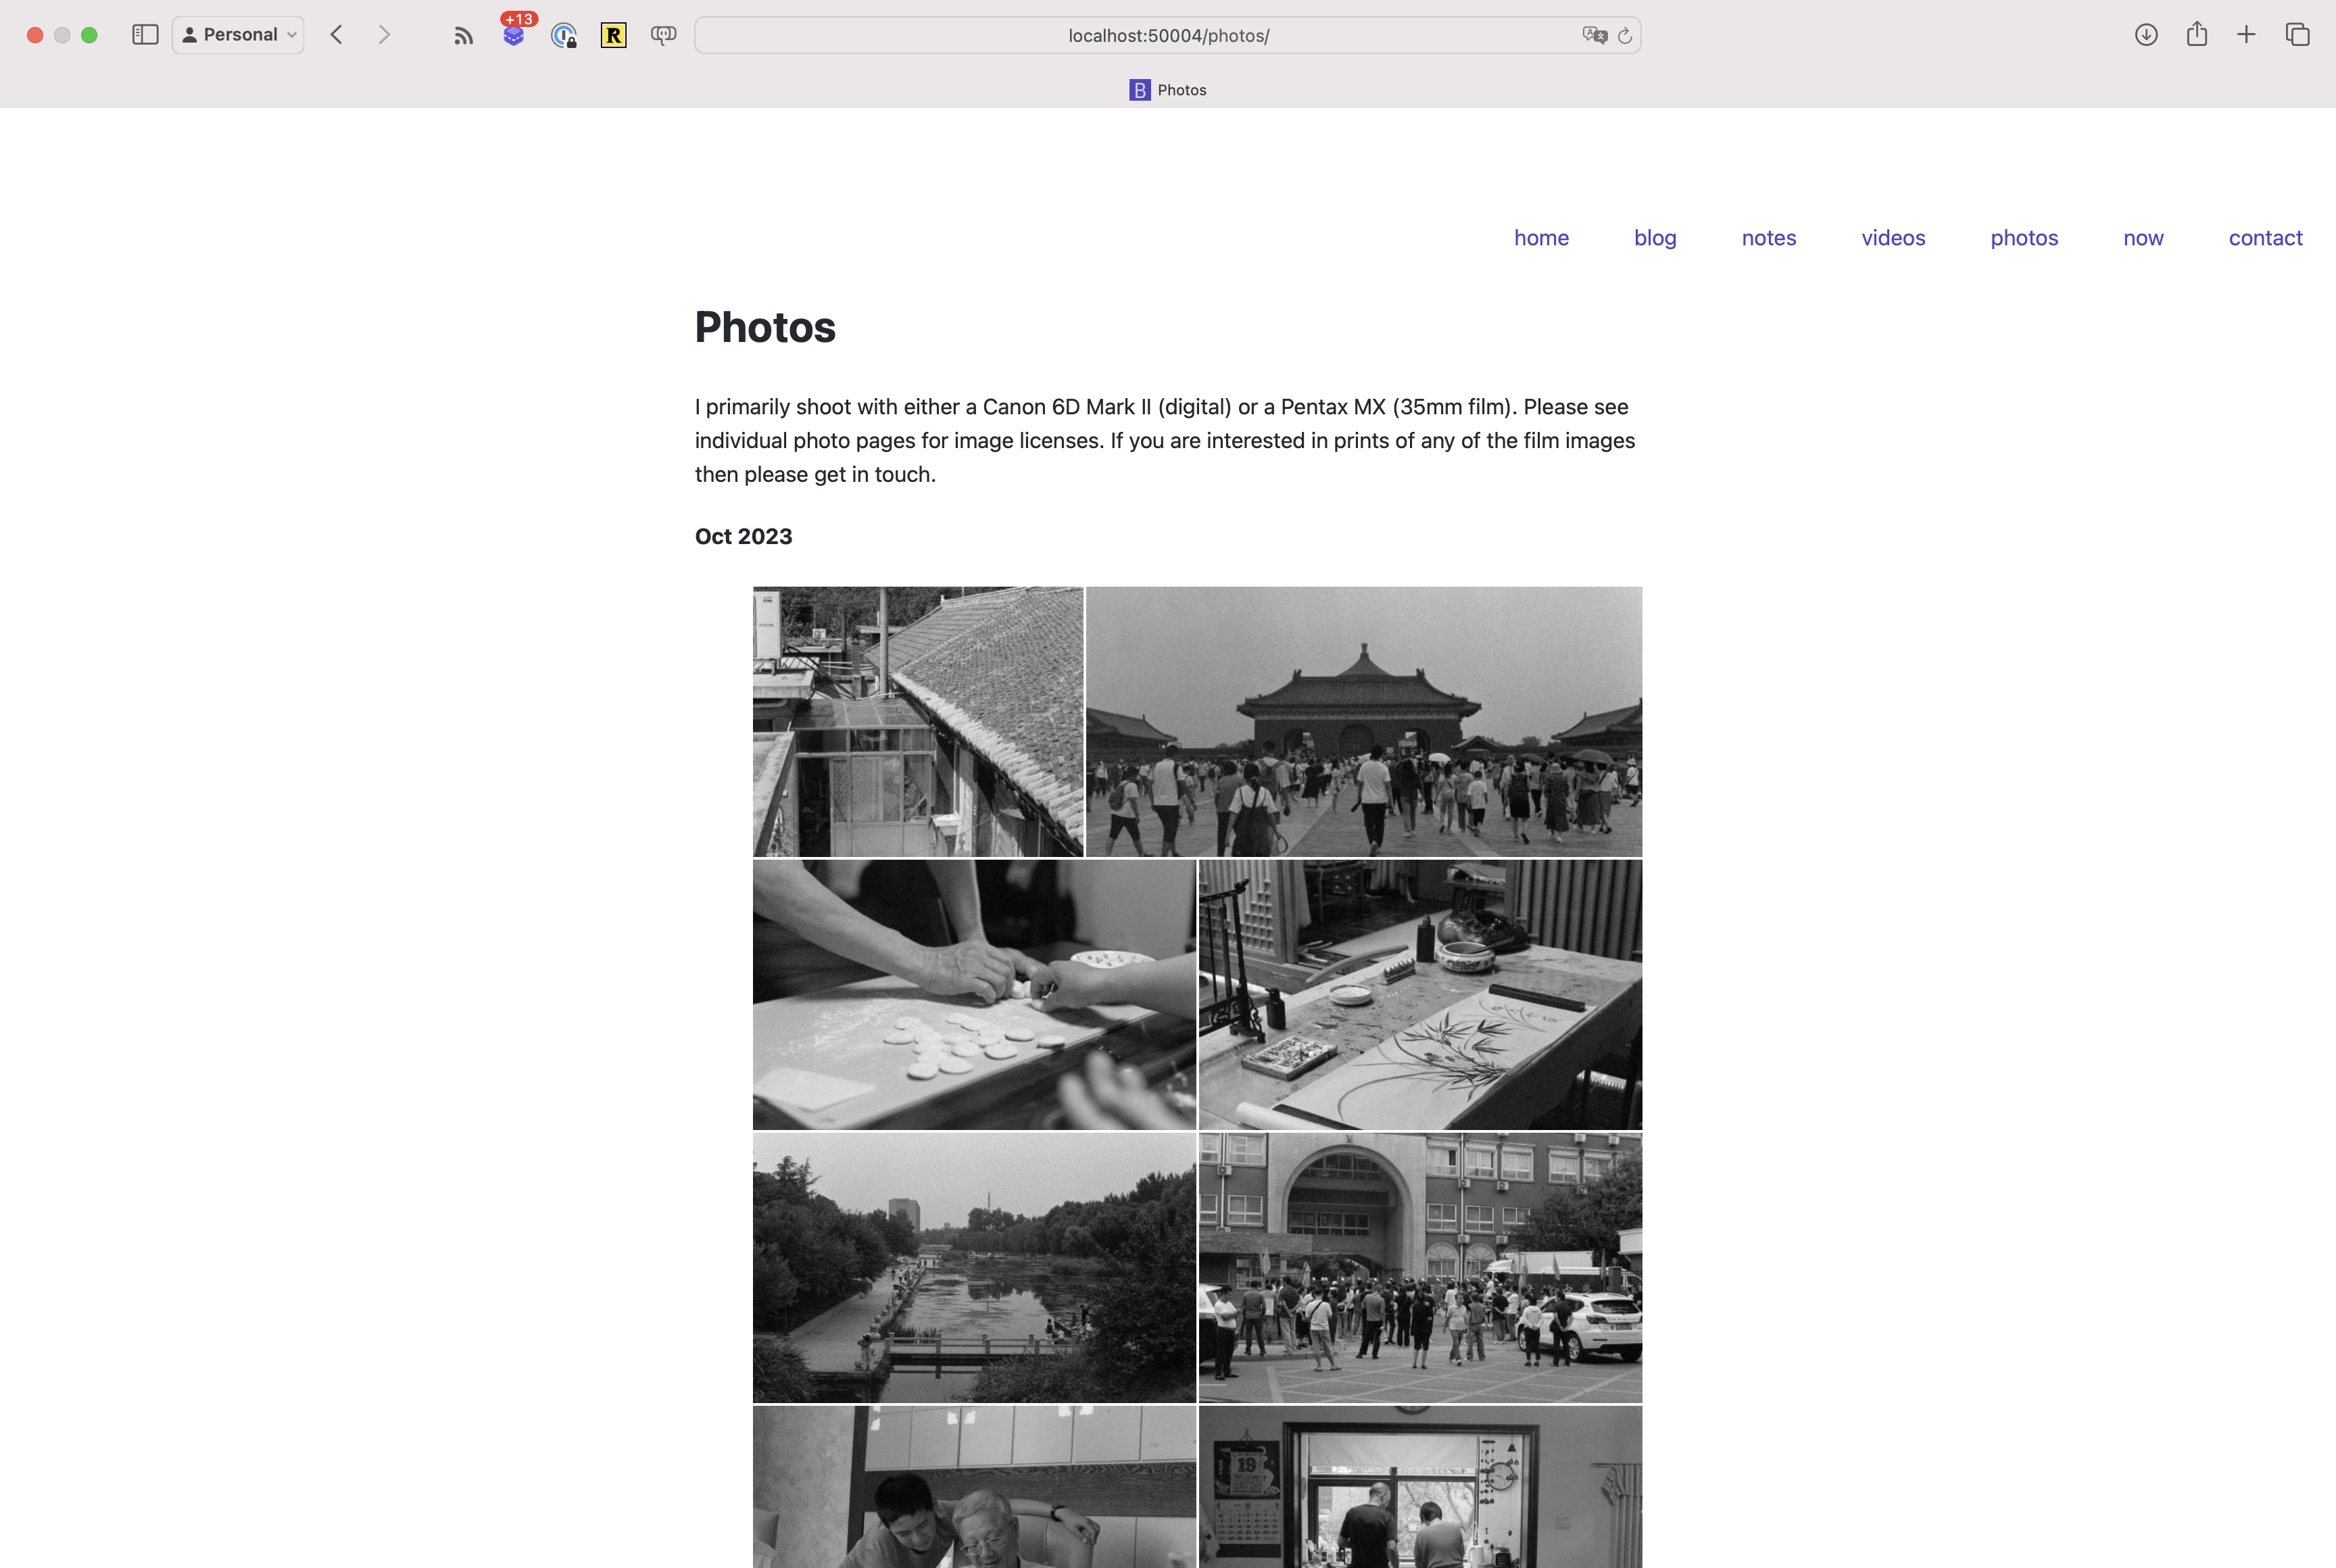 The list page showing my photos using the new photos template.